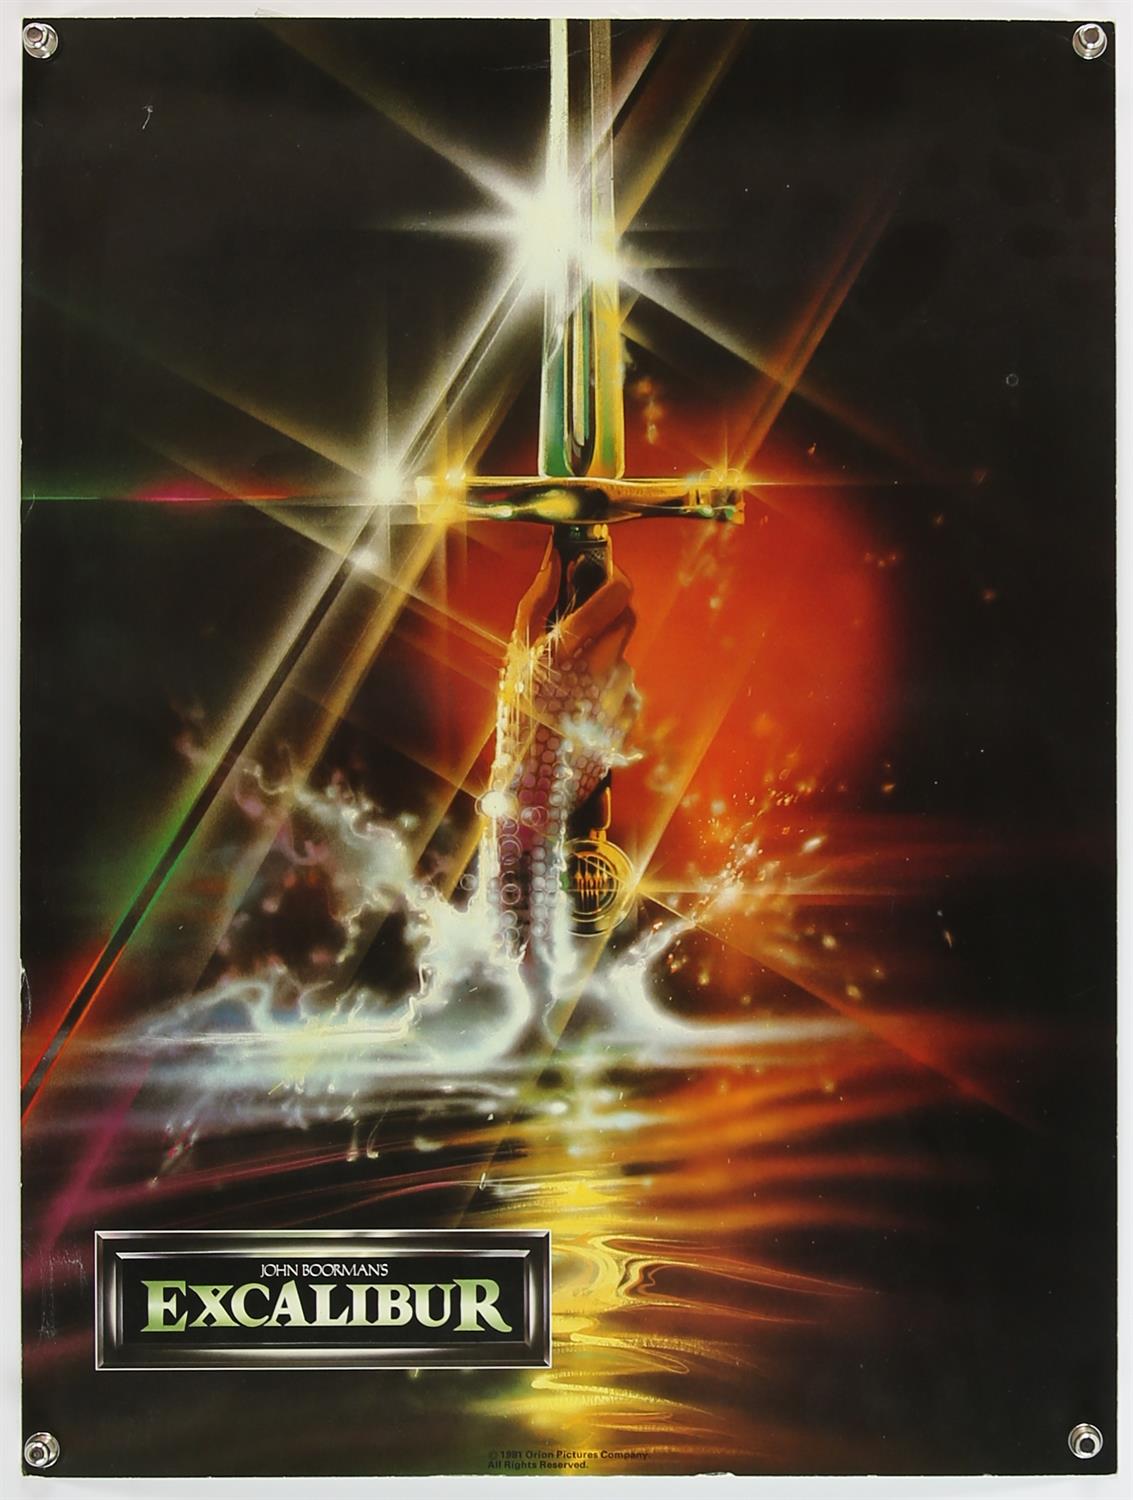 Excalibur (1981) Spanish One Sheet film poster and four oversized lobby cards (5). - Image 3 of 3